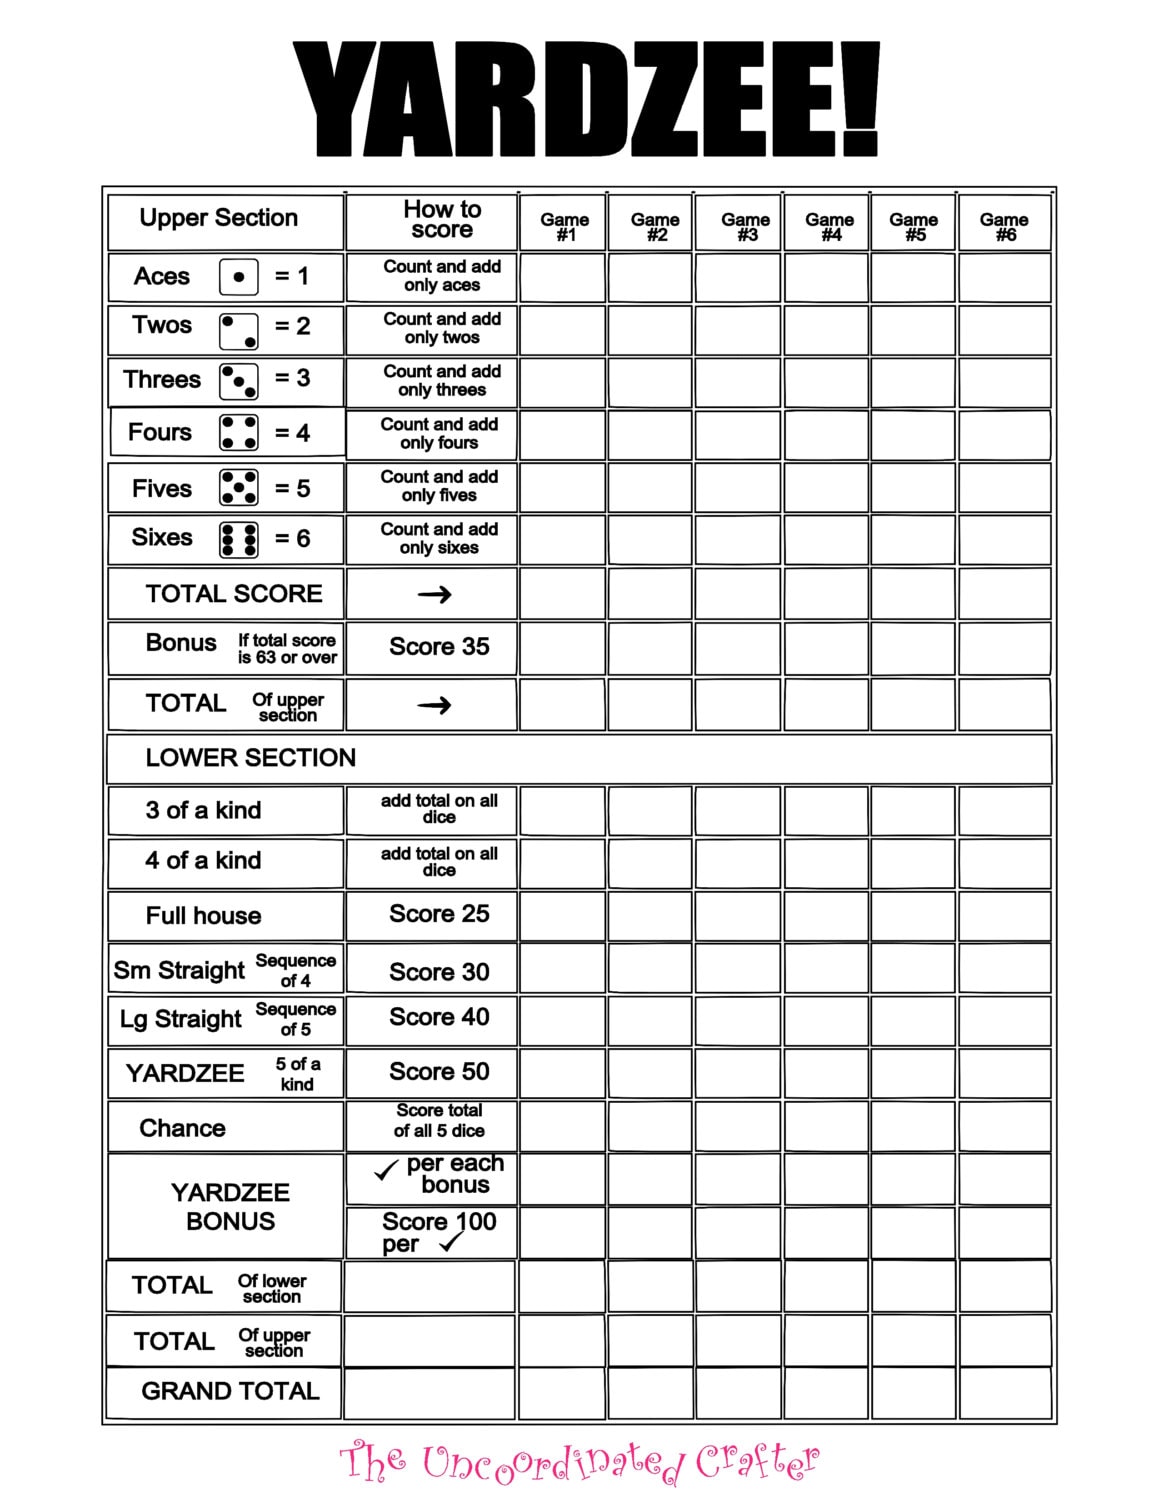 Printable YARDZEE Score Card file with Uncoordinated Crafter